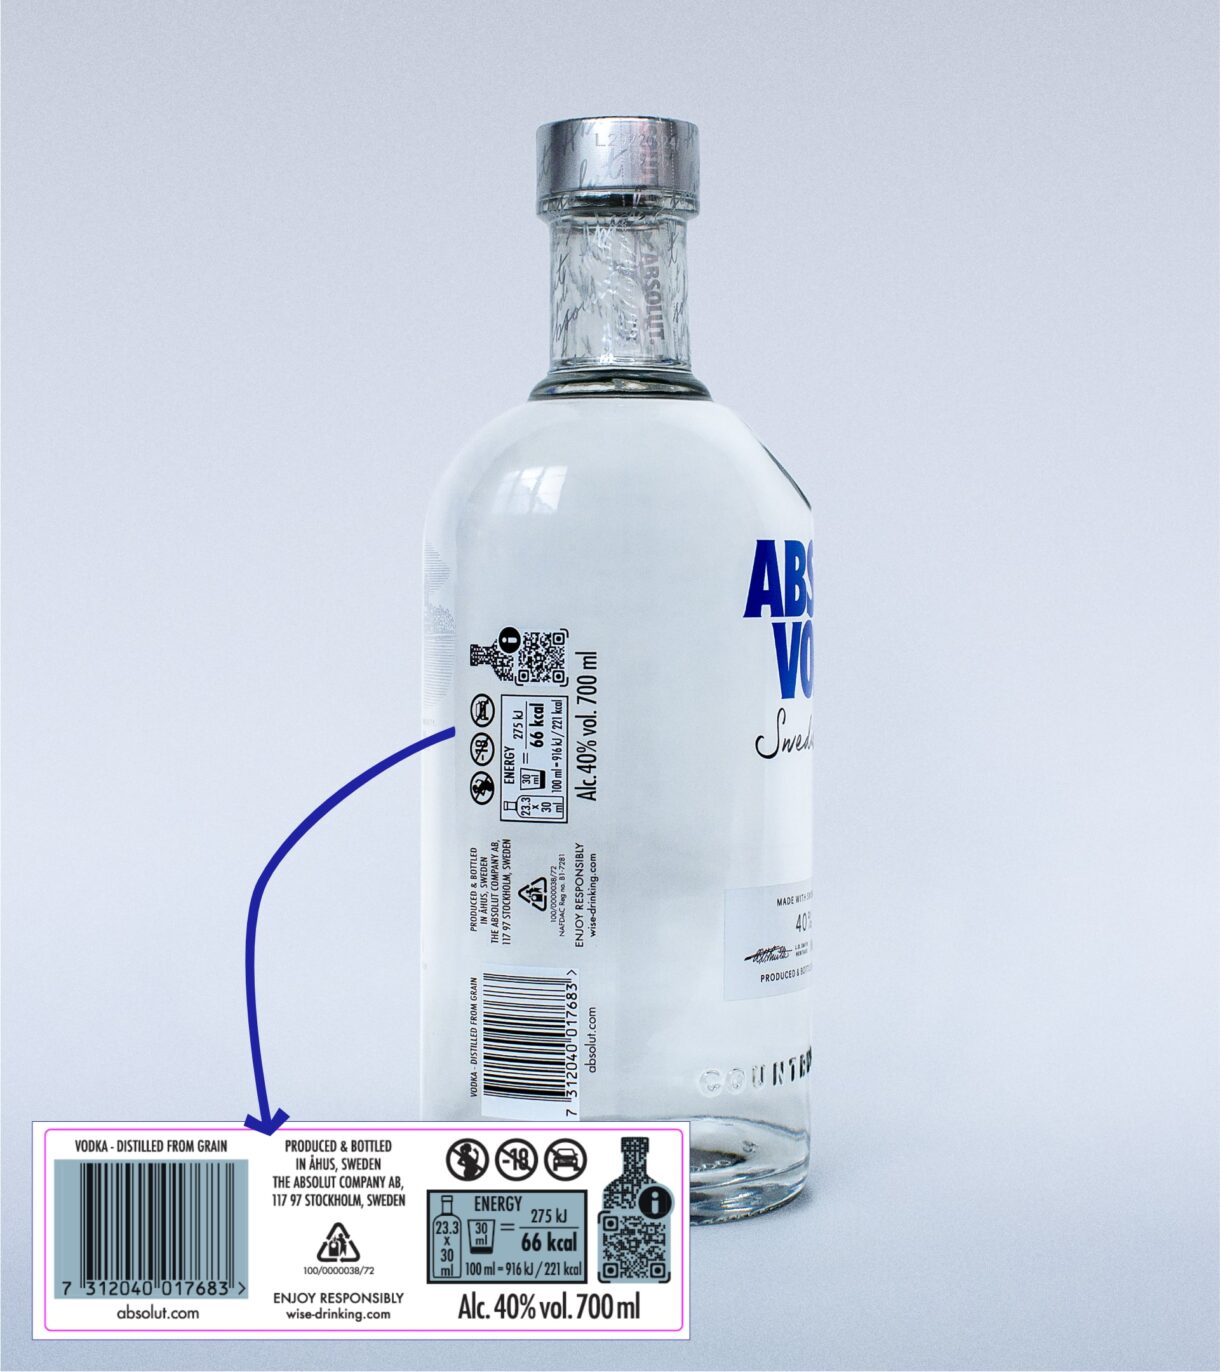 The barcode on the Absolut Vodka bottle